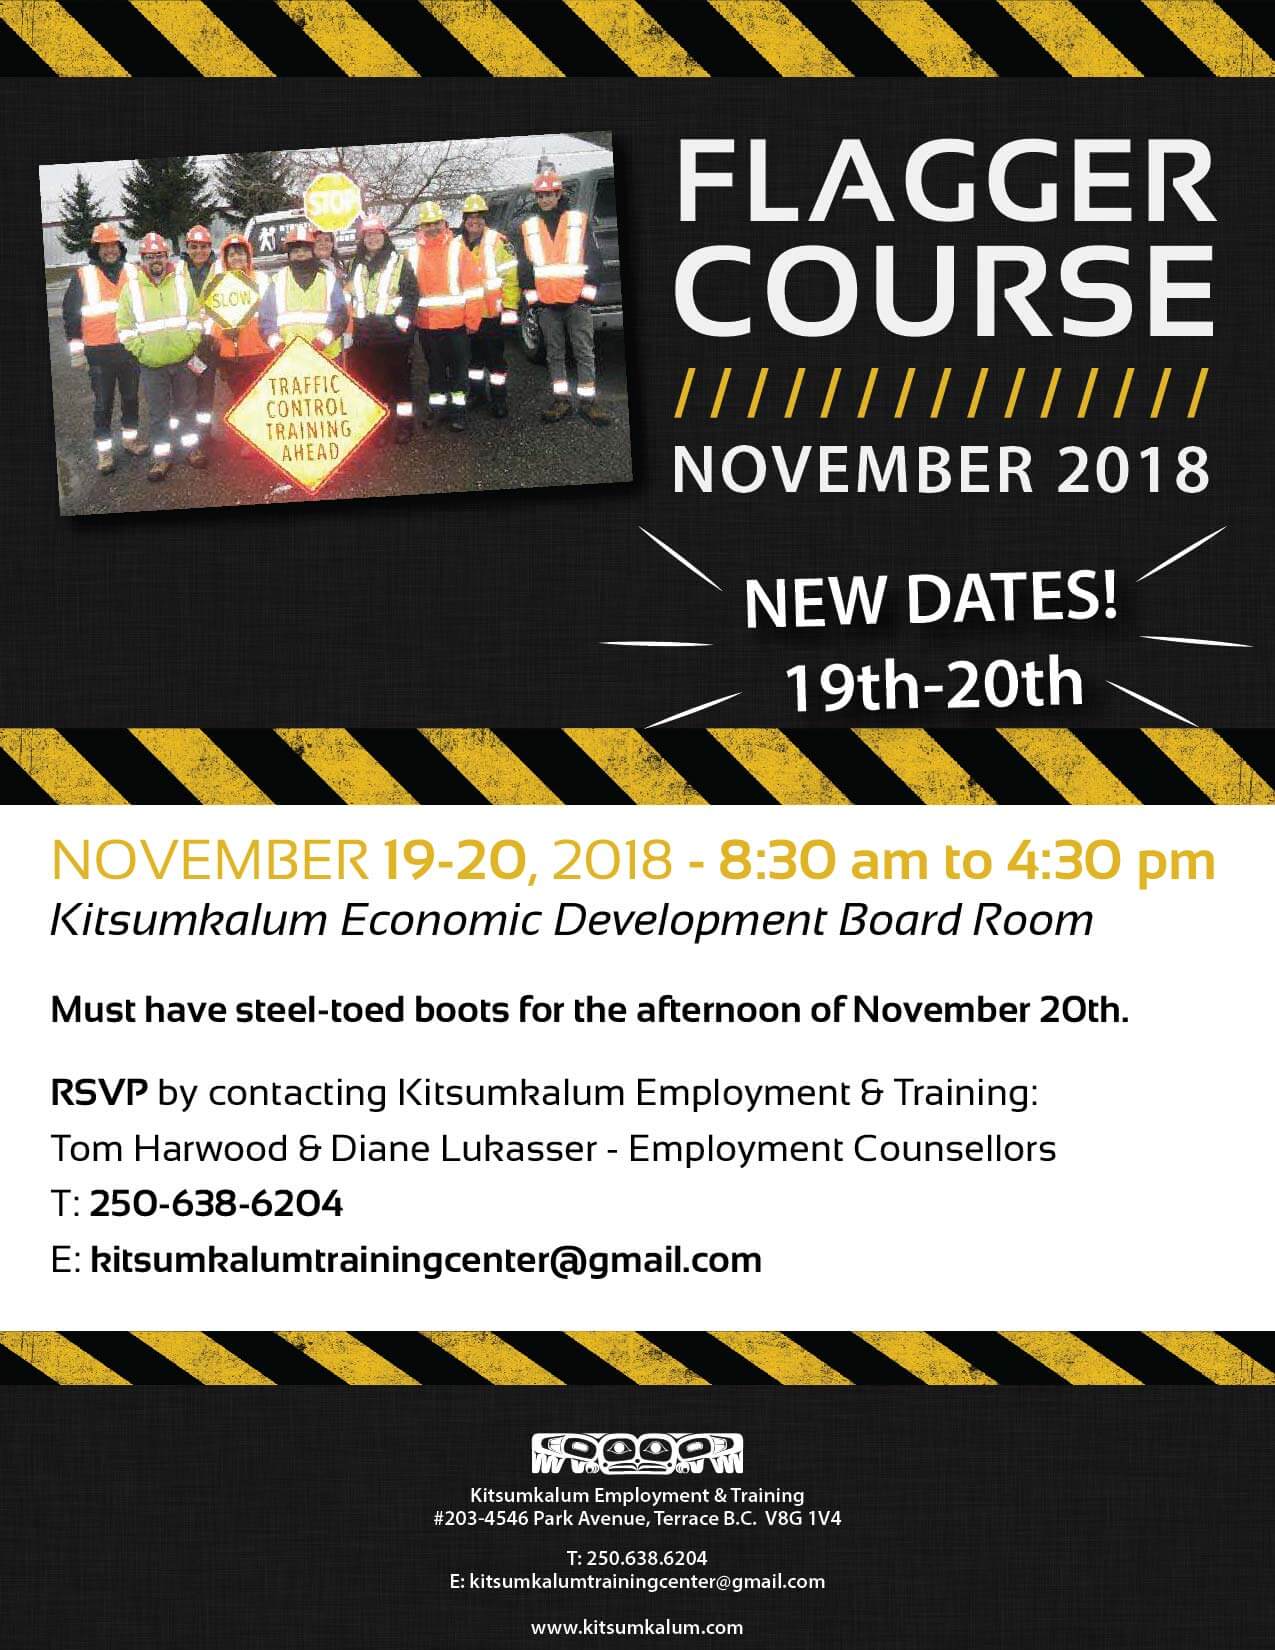 Flagging Course Offered in November